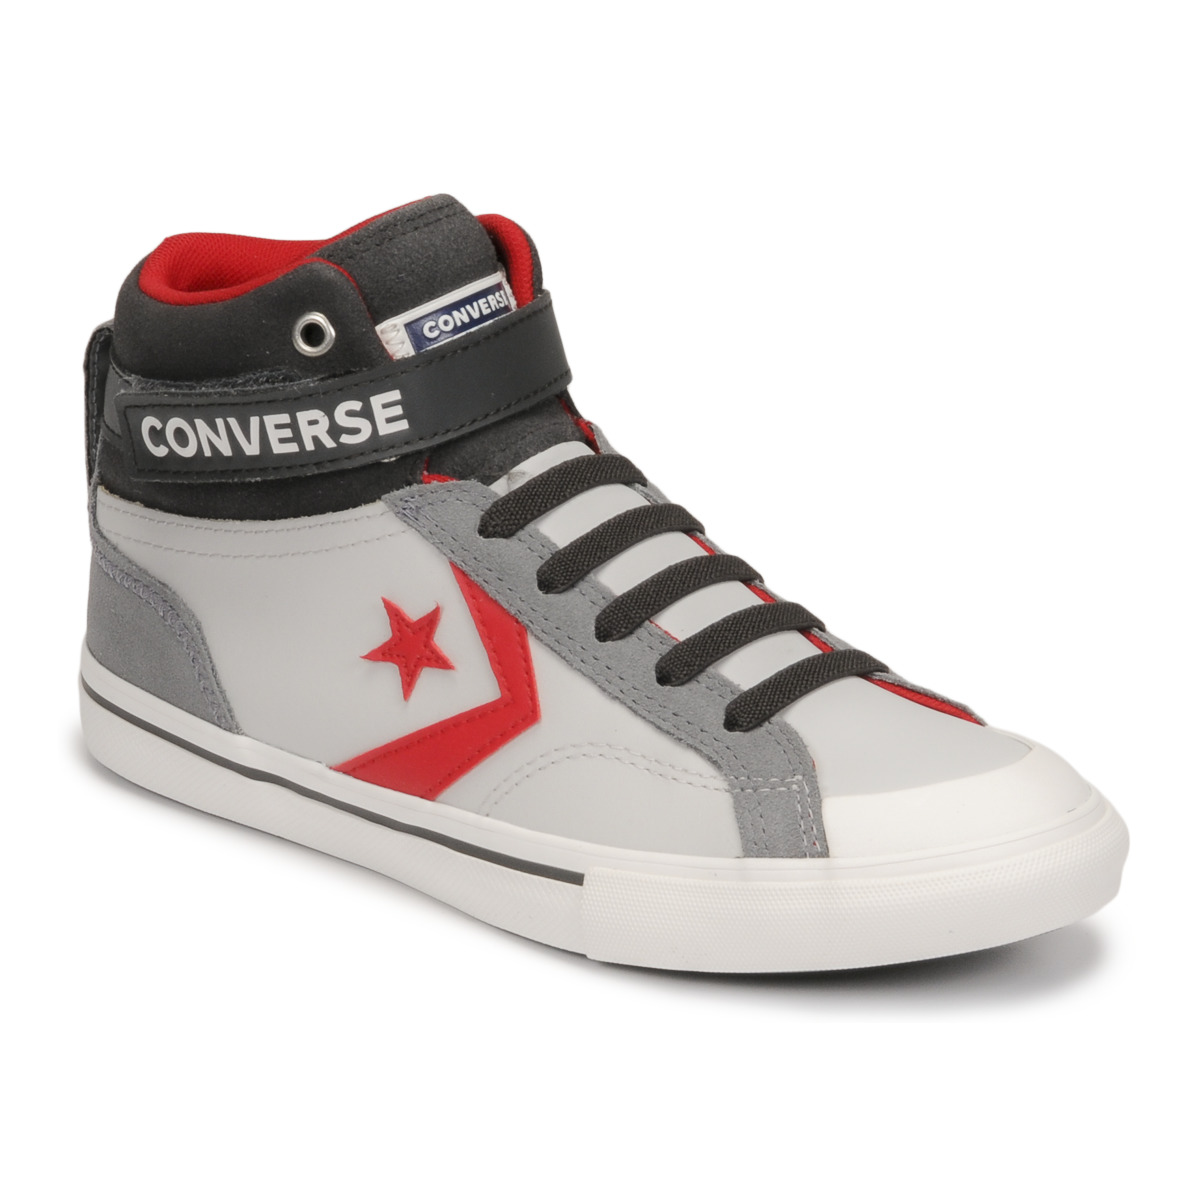 Converse PRO with trainers TWIST Free STRAP Rubbersole.co.uk LEATHER HI top - Hi - Grey £ ! Child Shoes BLAZE Delivery